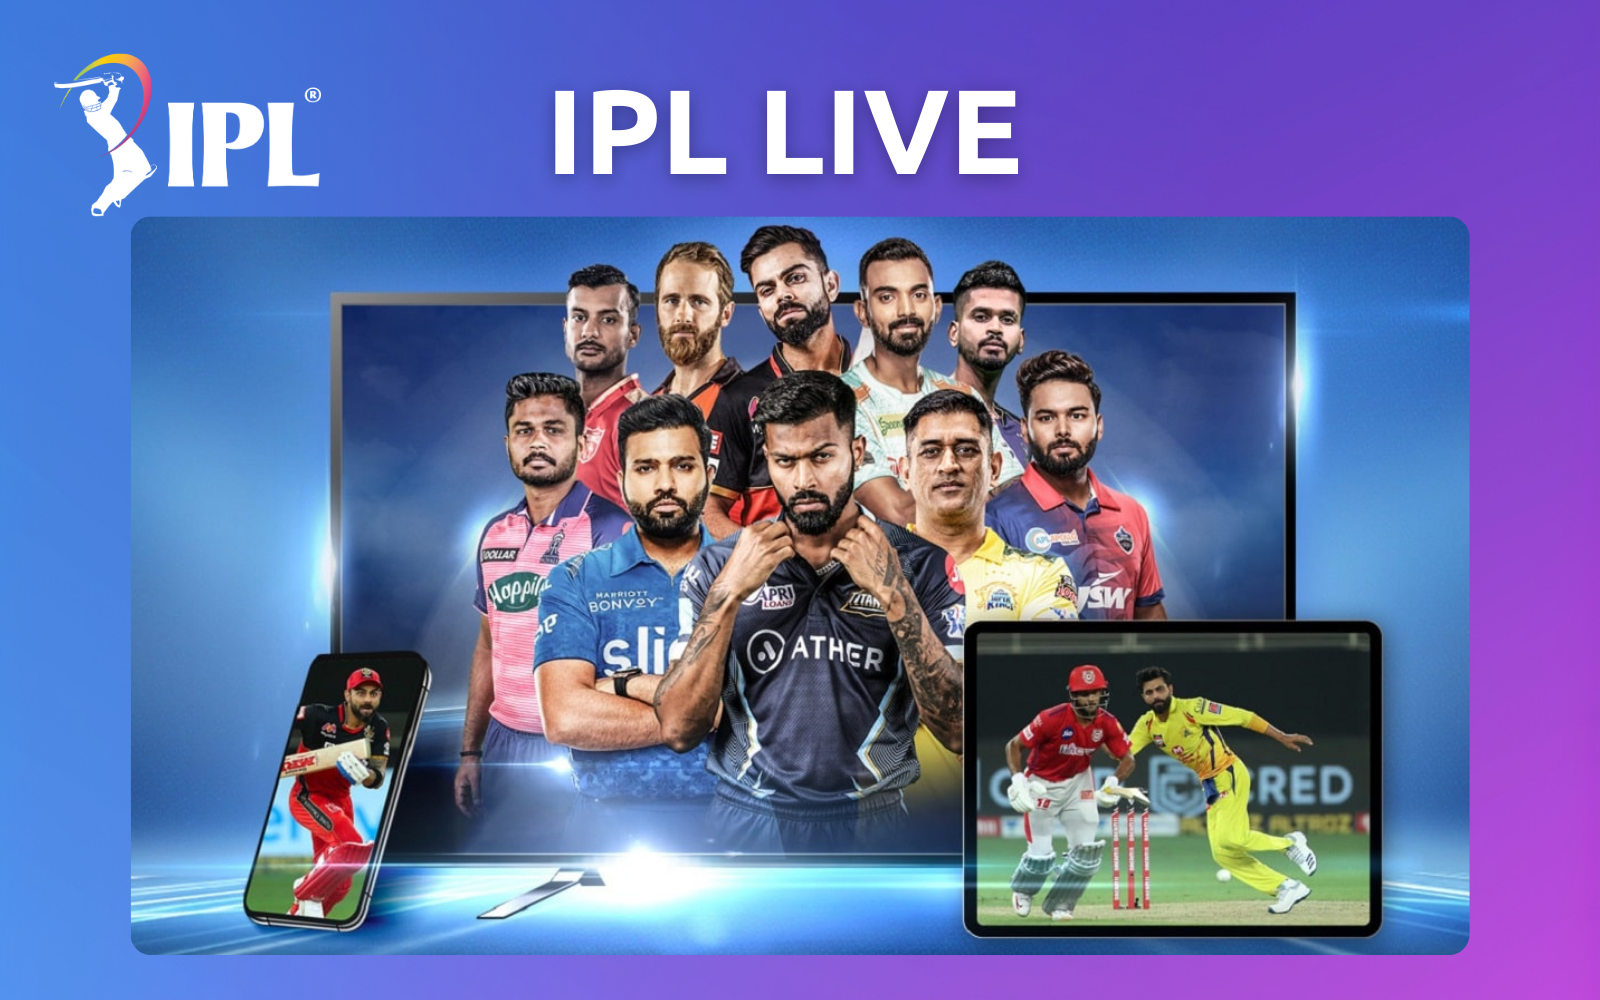 How To Watch IPL Live